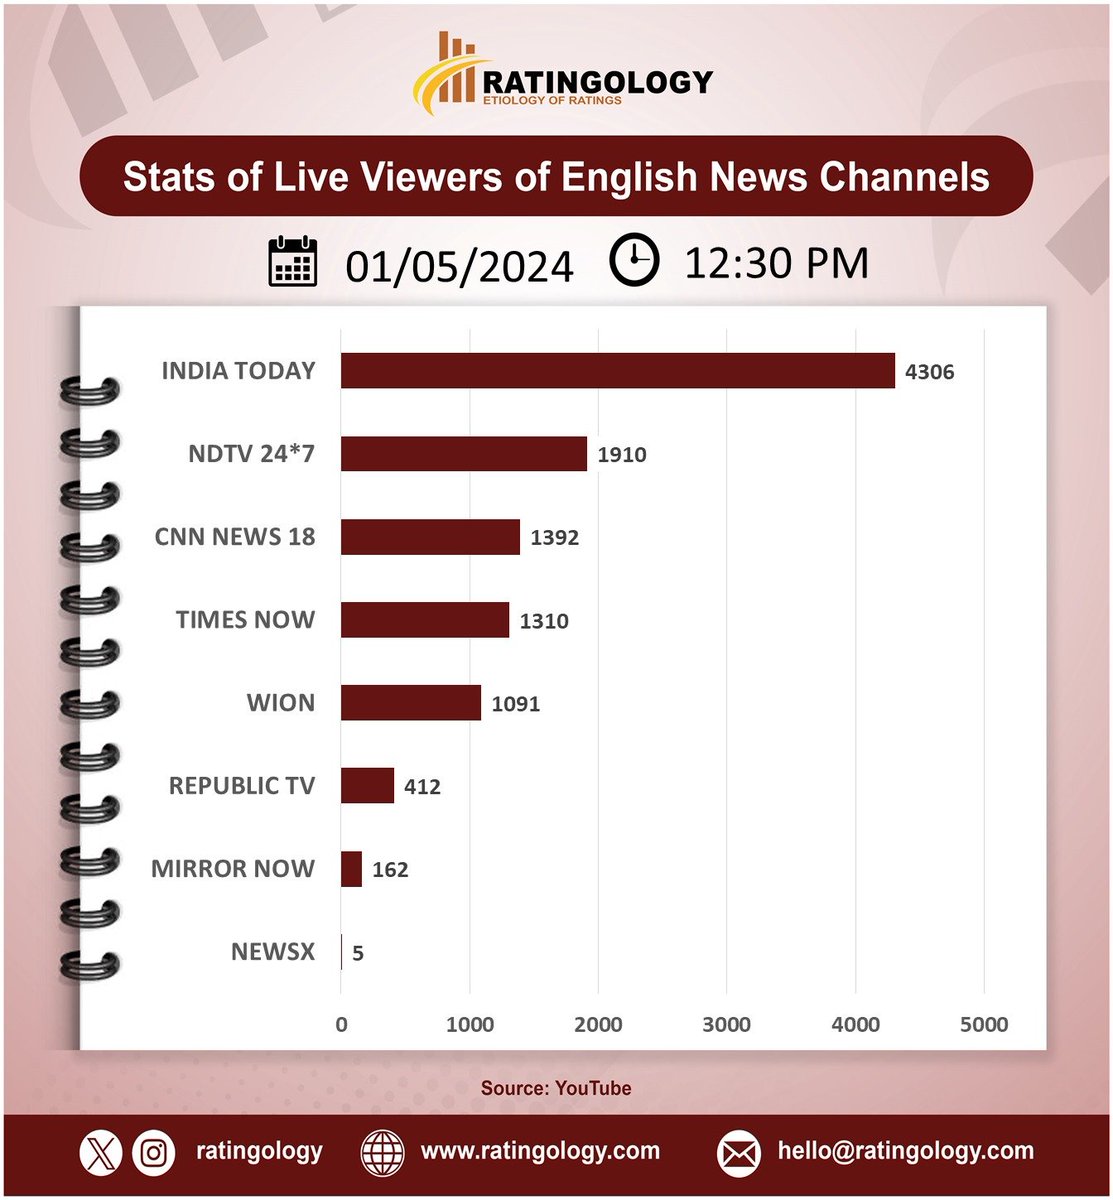 𝐒𝐭𝐚𝐭𝐬 𝐨𝐟 𝐥𝐢𝐯𝐞 𝐯𝐢𝐞𝐰𝐞𝐫𝐬 𝐨𝐧 #Youtube of #EnglishMedia #channelsat 12:30pm, Date: 1/May/2024  #Ratingology #Mediastats #RatingsKaBaap #DataScience #IndiaToday #Wion #RepublicTV #CNNNews18 #TimesNow #NewsX #NDTV24x7 #MirrorNow